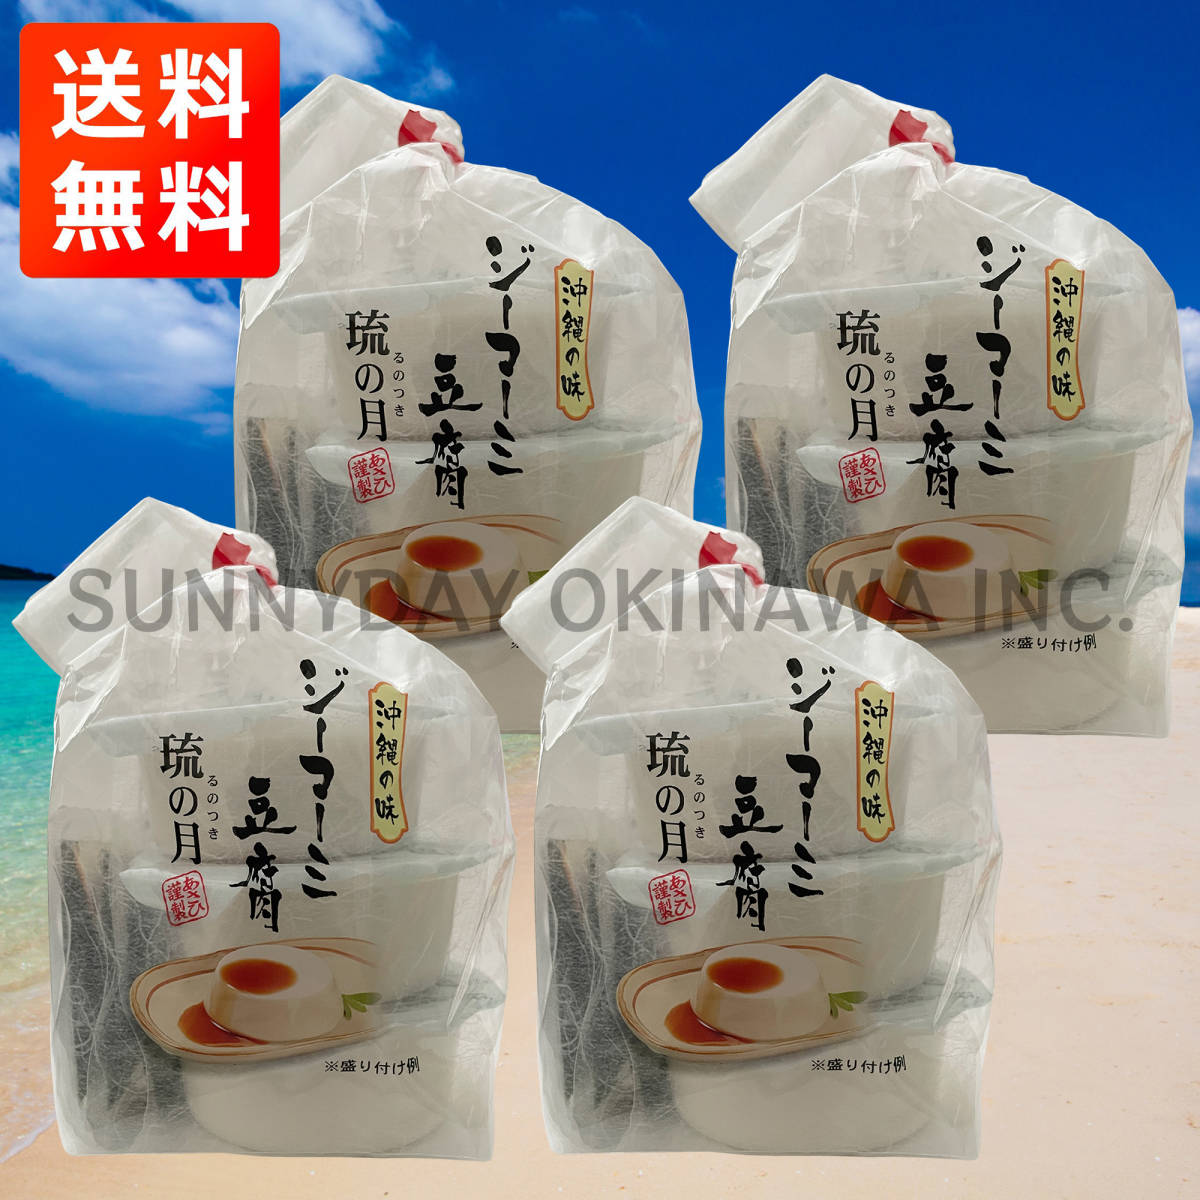  Okinawa. taste ji-ma-mi tofu .. month 4 sack 12 cup normal temperature type ... quality product . earth production your order 